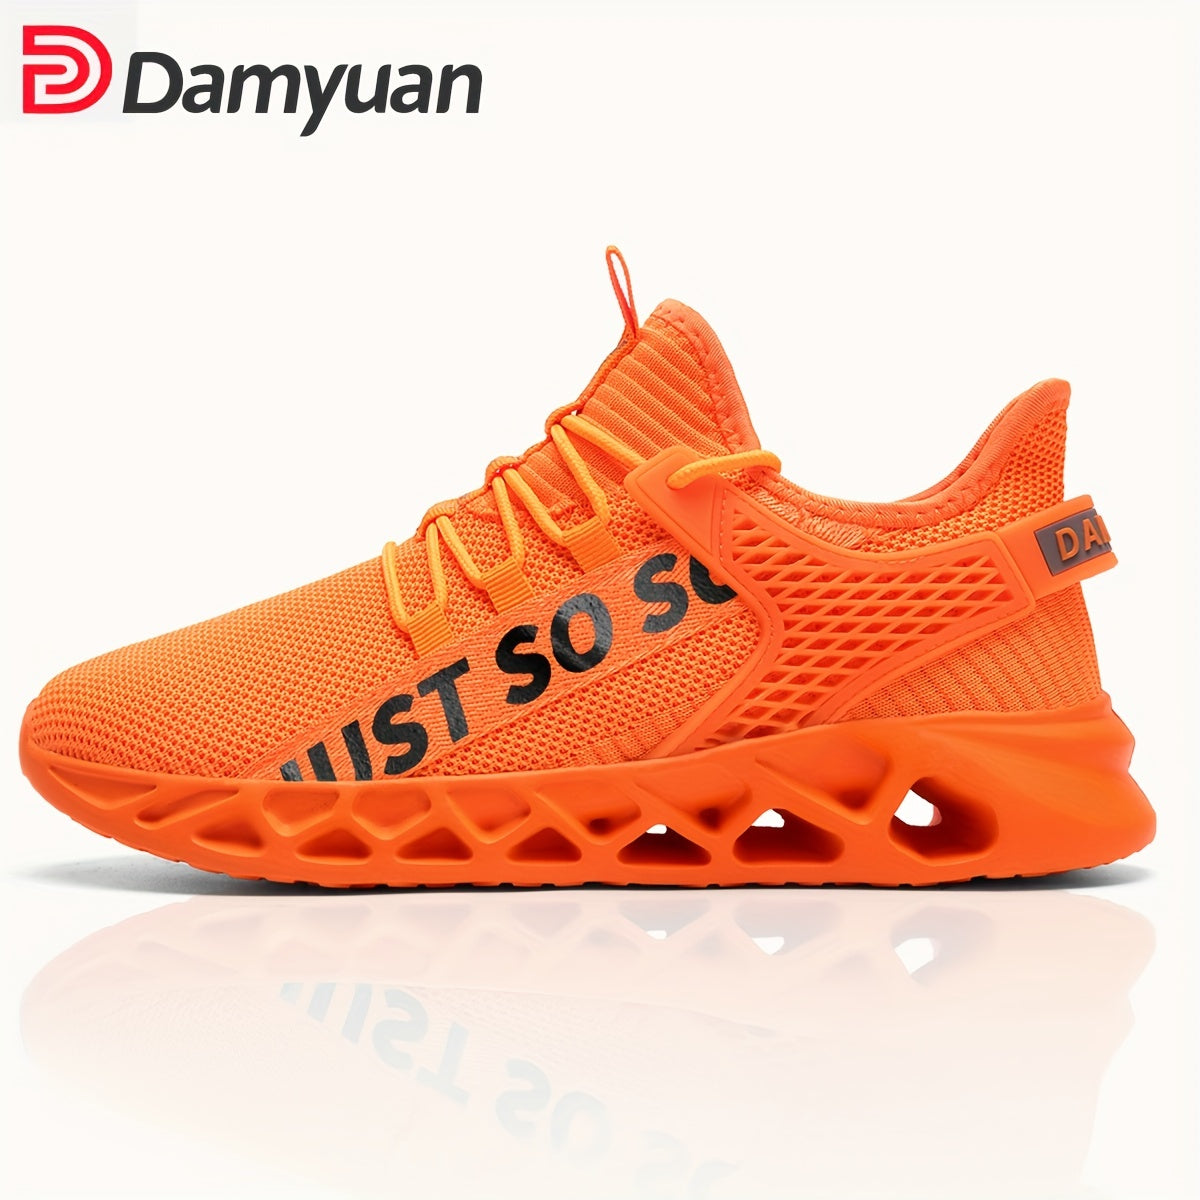 Damyuan Blade Type Shoes, Breathable Shock Absorption